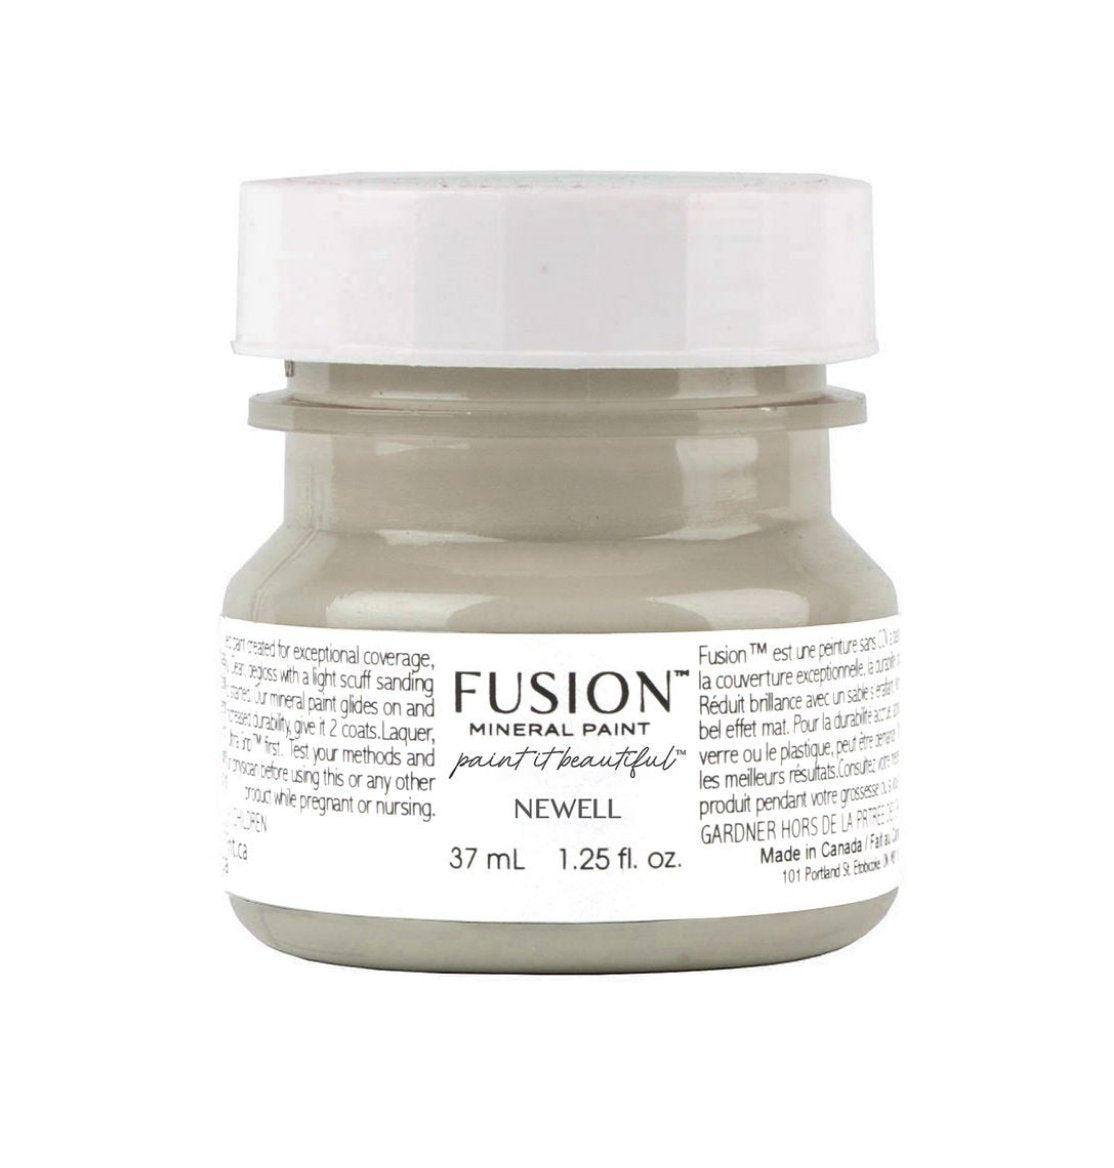 Fusion mineral paint newell tester pot